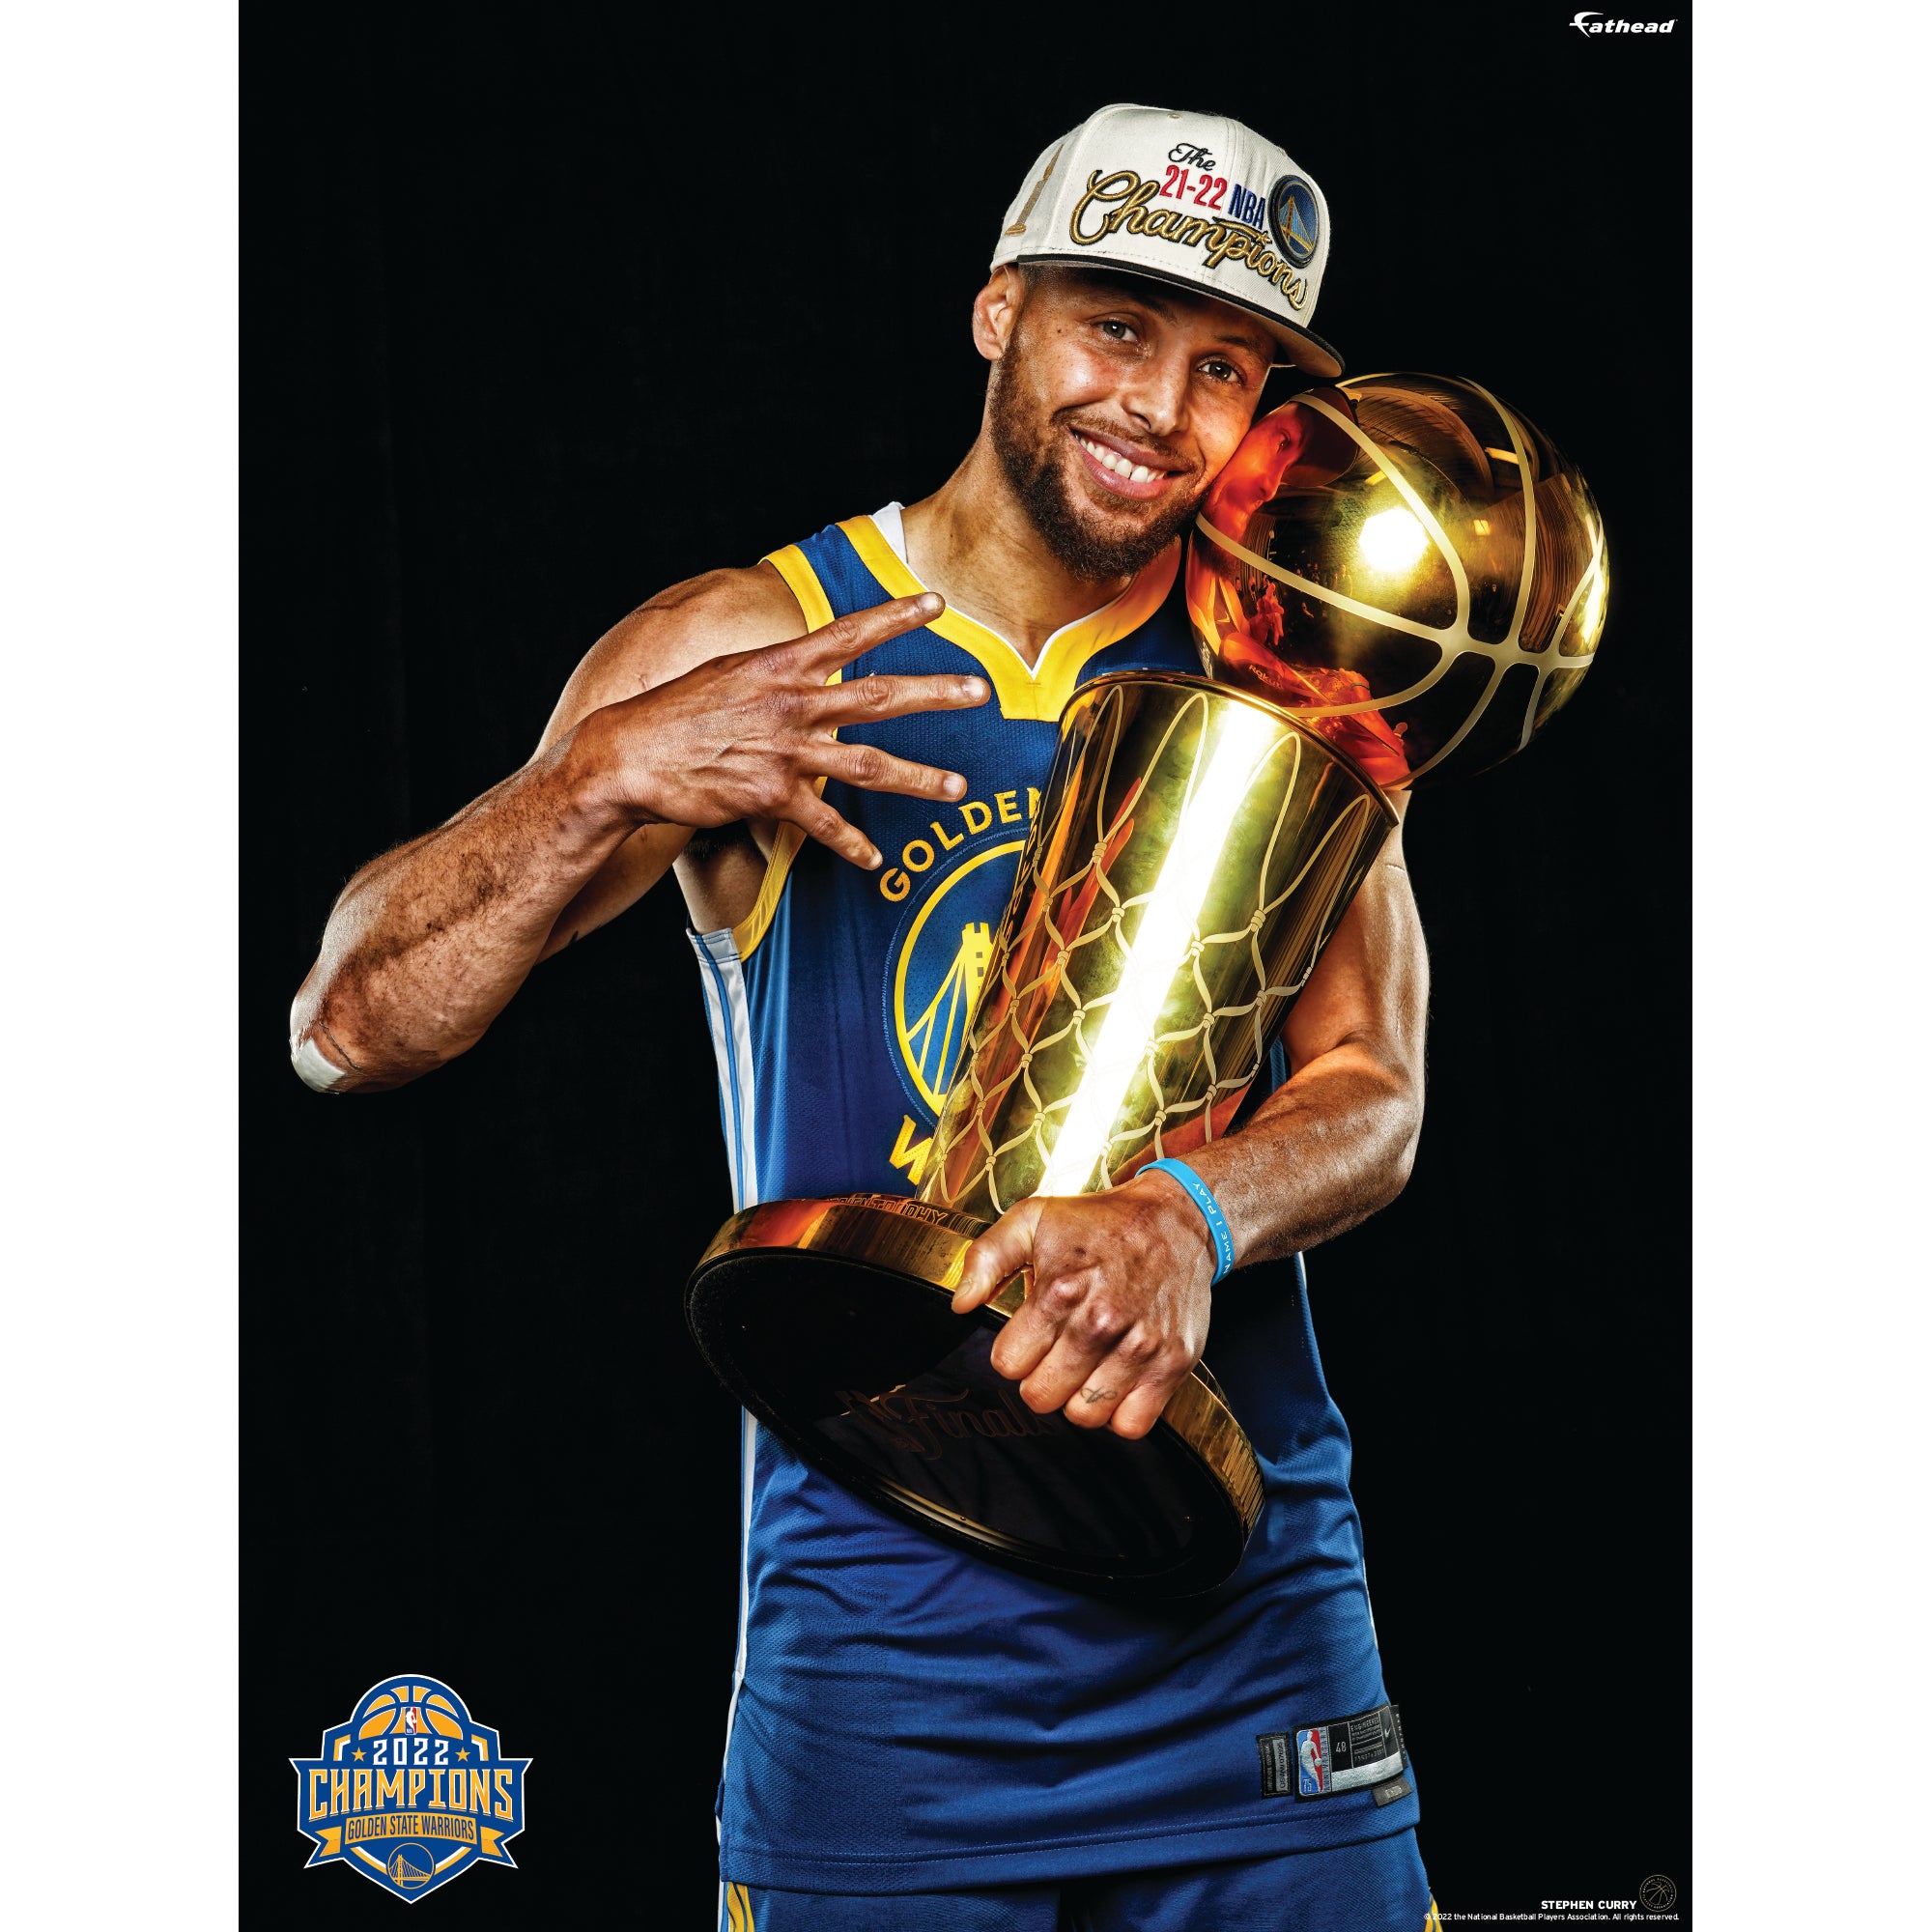 2023 Golden State Warriors Champions Poster Wall Decor Stephen